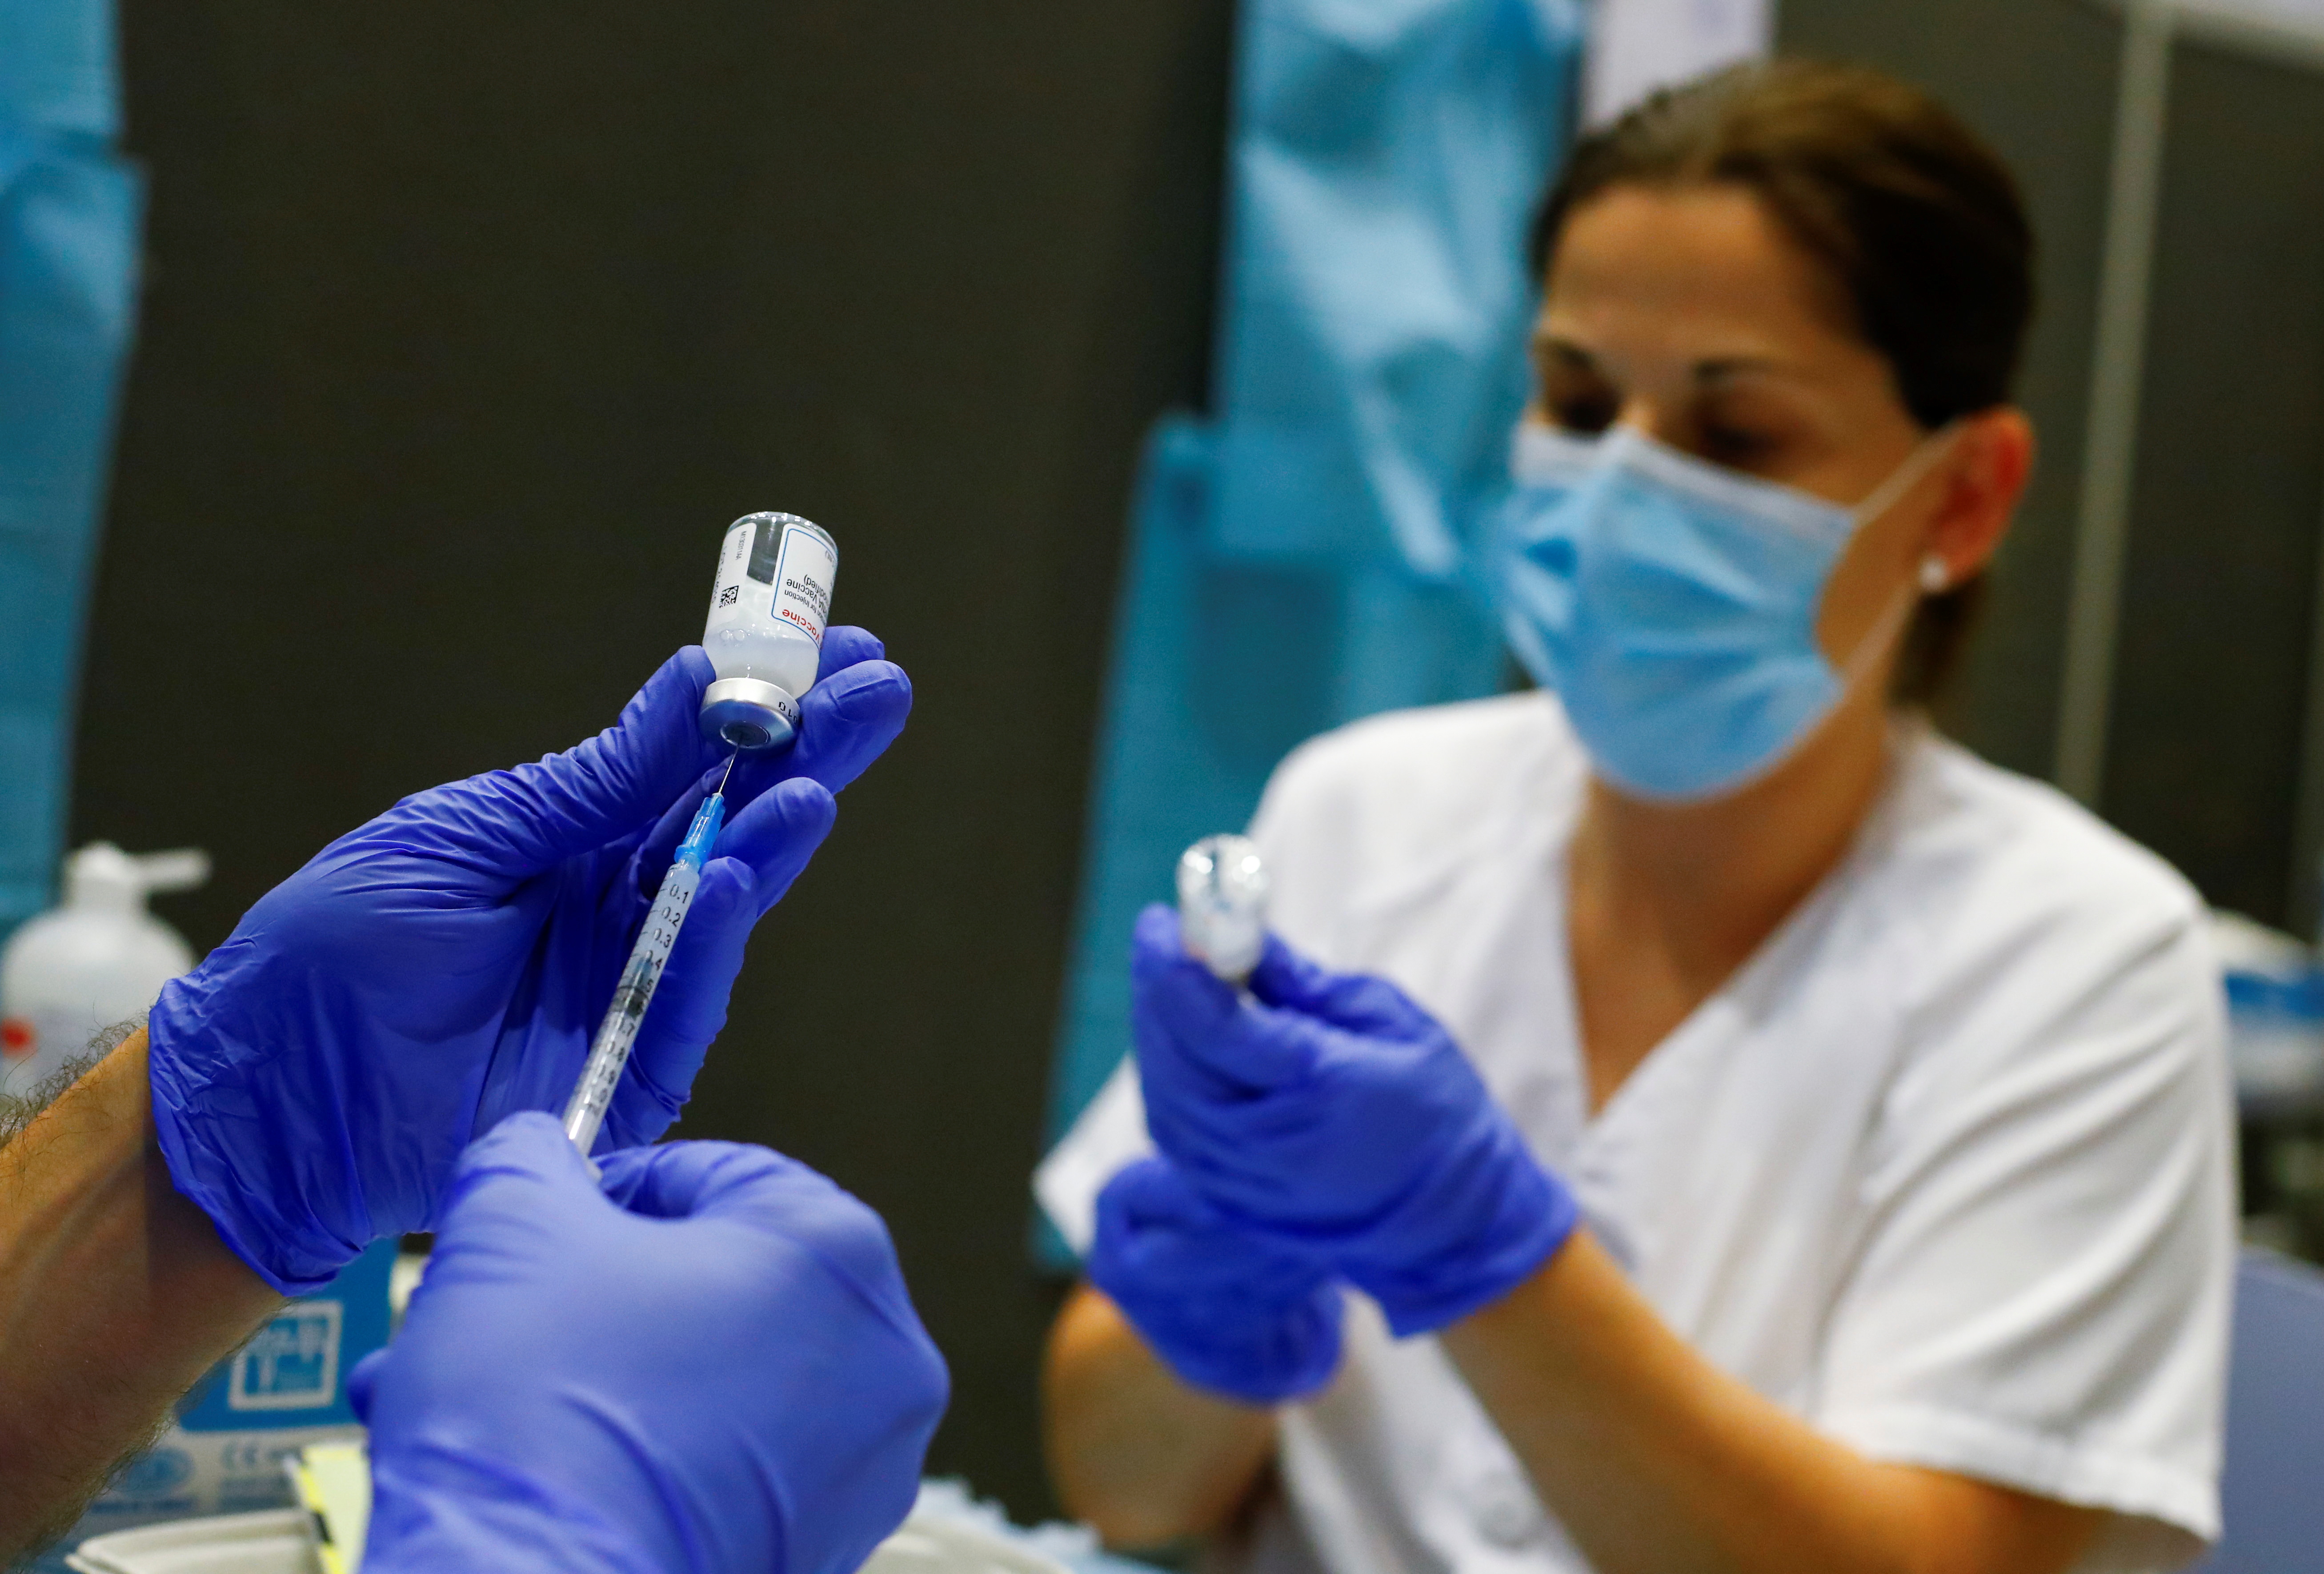 Nurses prepare syringes with doses of the Moderna vaccine against the coronavirus disease (COVID-19) at a vaccination centre in Meloneras on the island of Gran Canaria, Spain, July 28, 2021. REUTERS/Borja Suarez